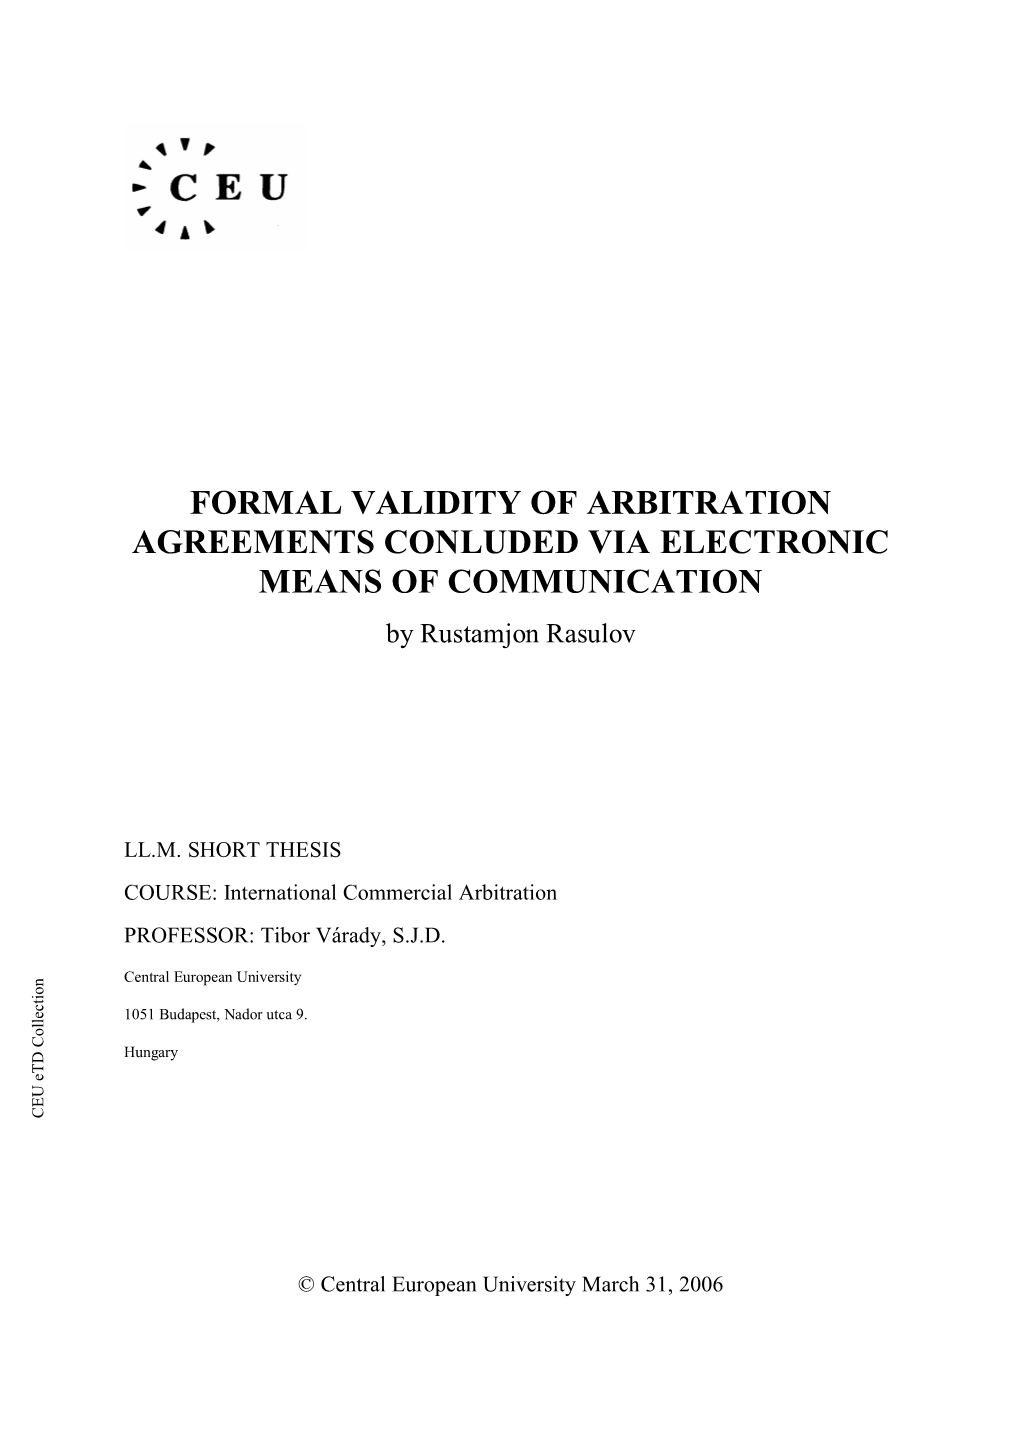 Formal Validity of Arbitration Agreements Conluded Via Electronic